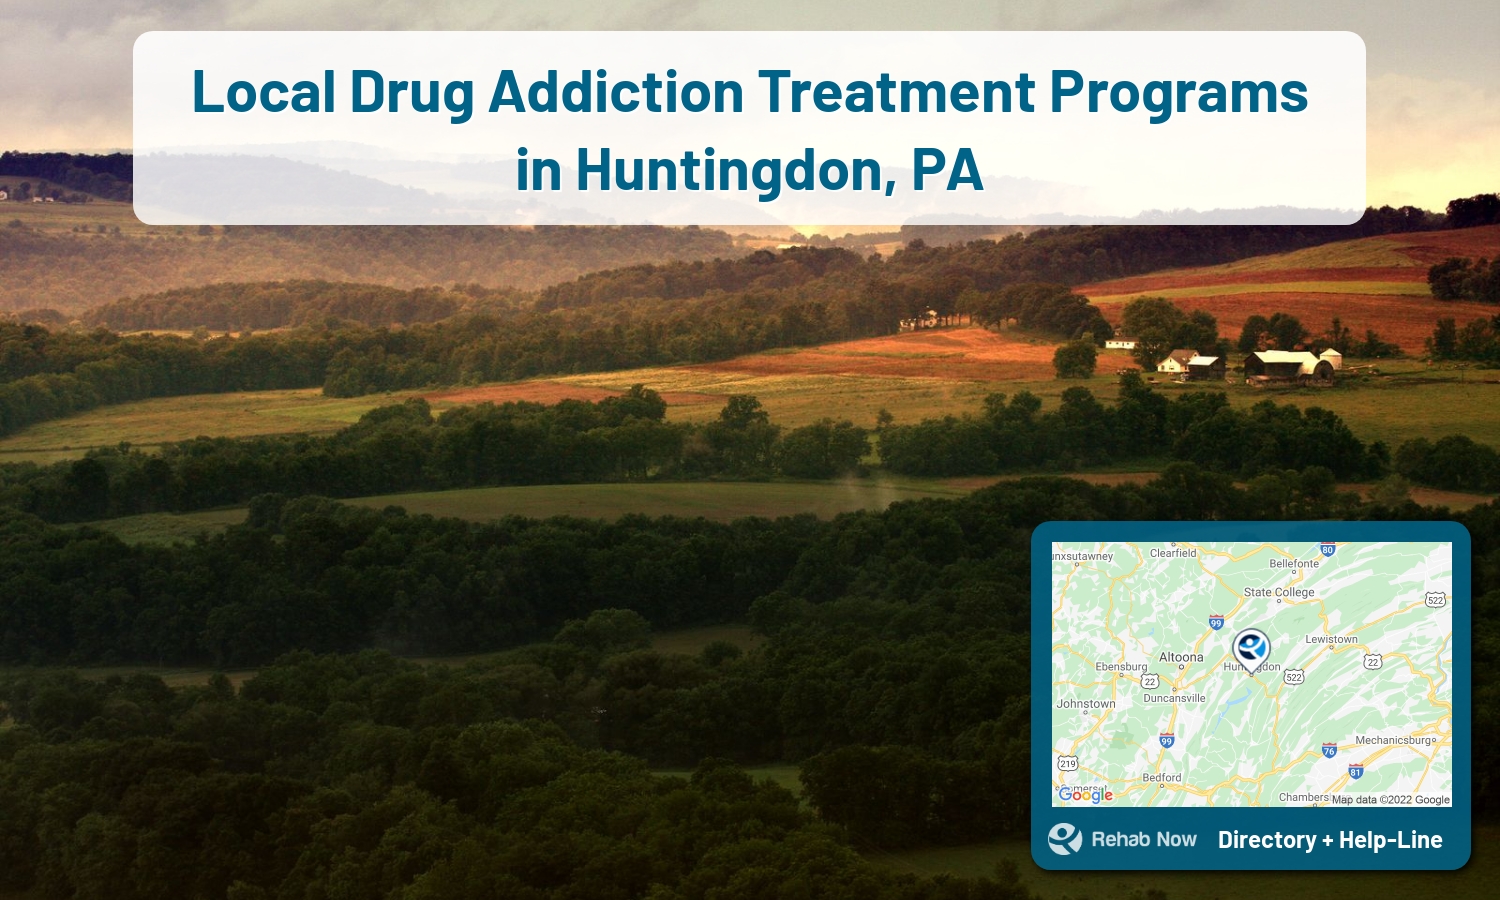 List of alcohol and drug treatment centers near you in Huntingdon, Pennsylvania. Research certifications, programs, methods, pricing, and more.